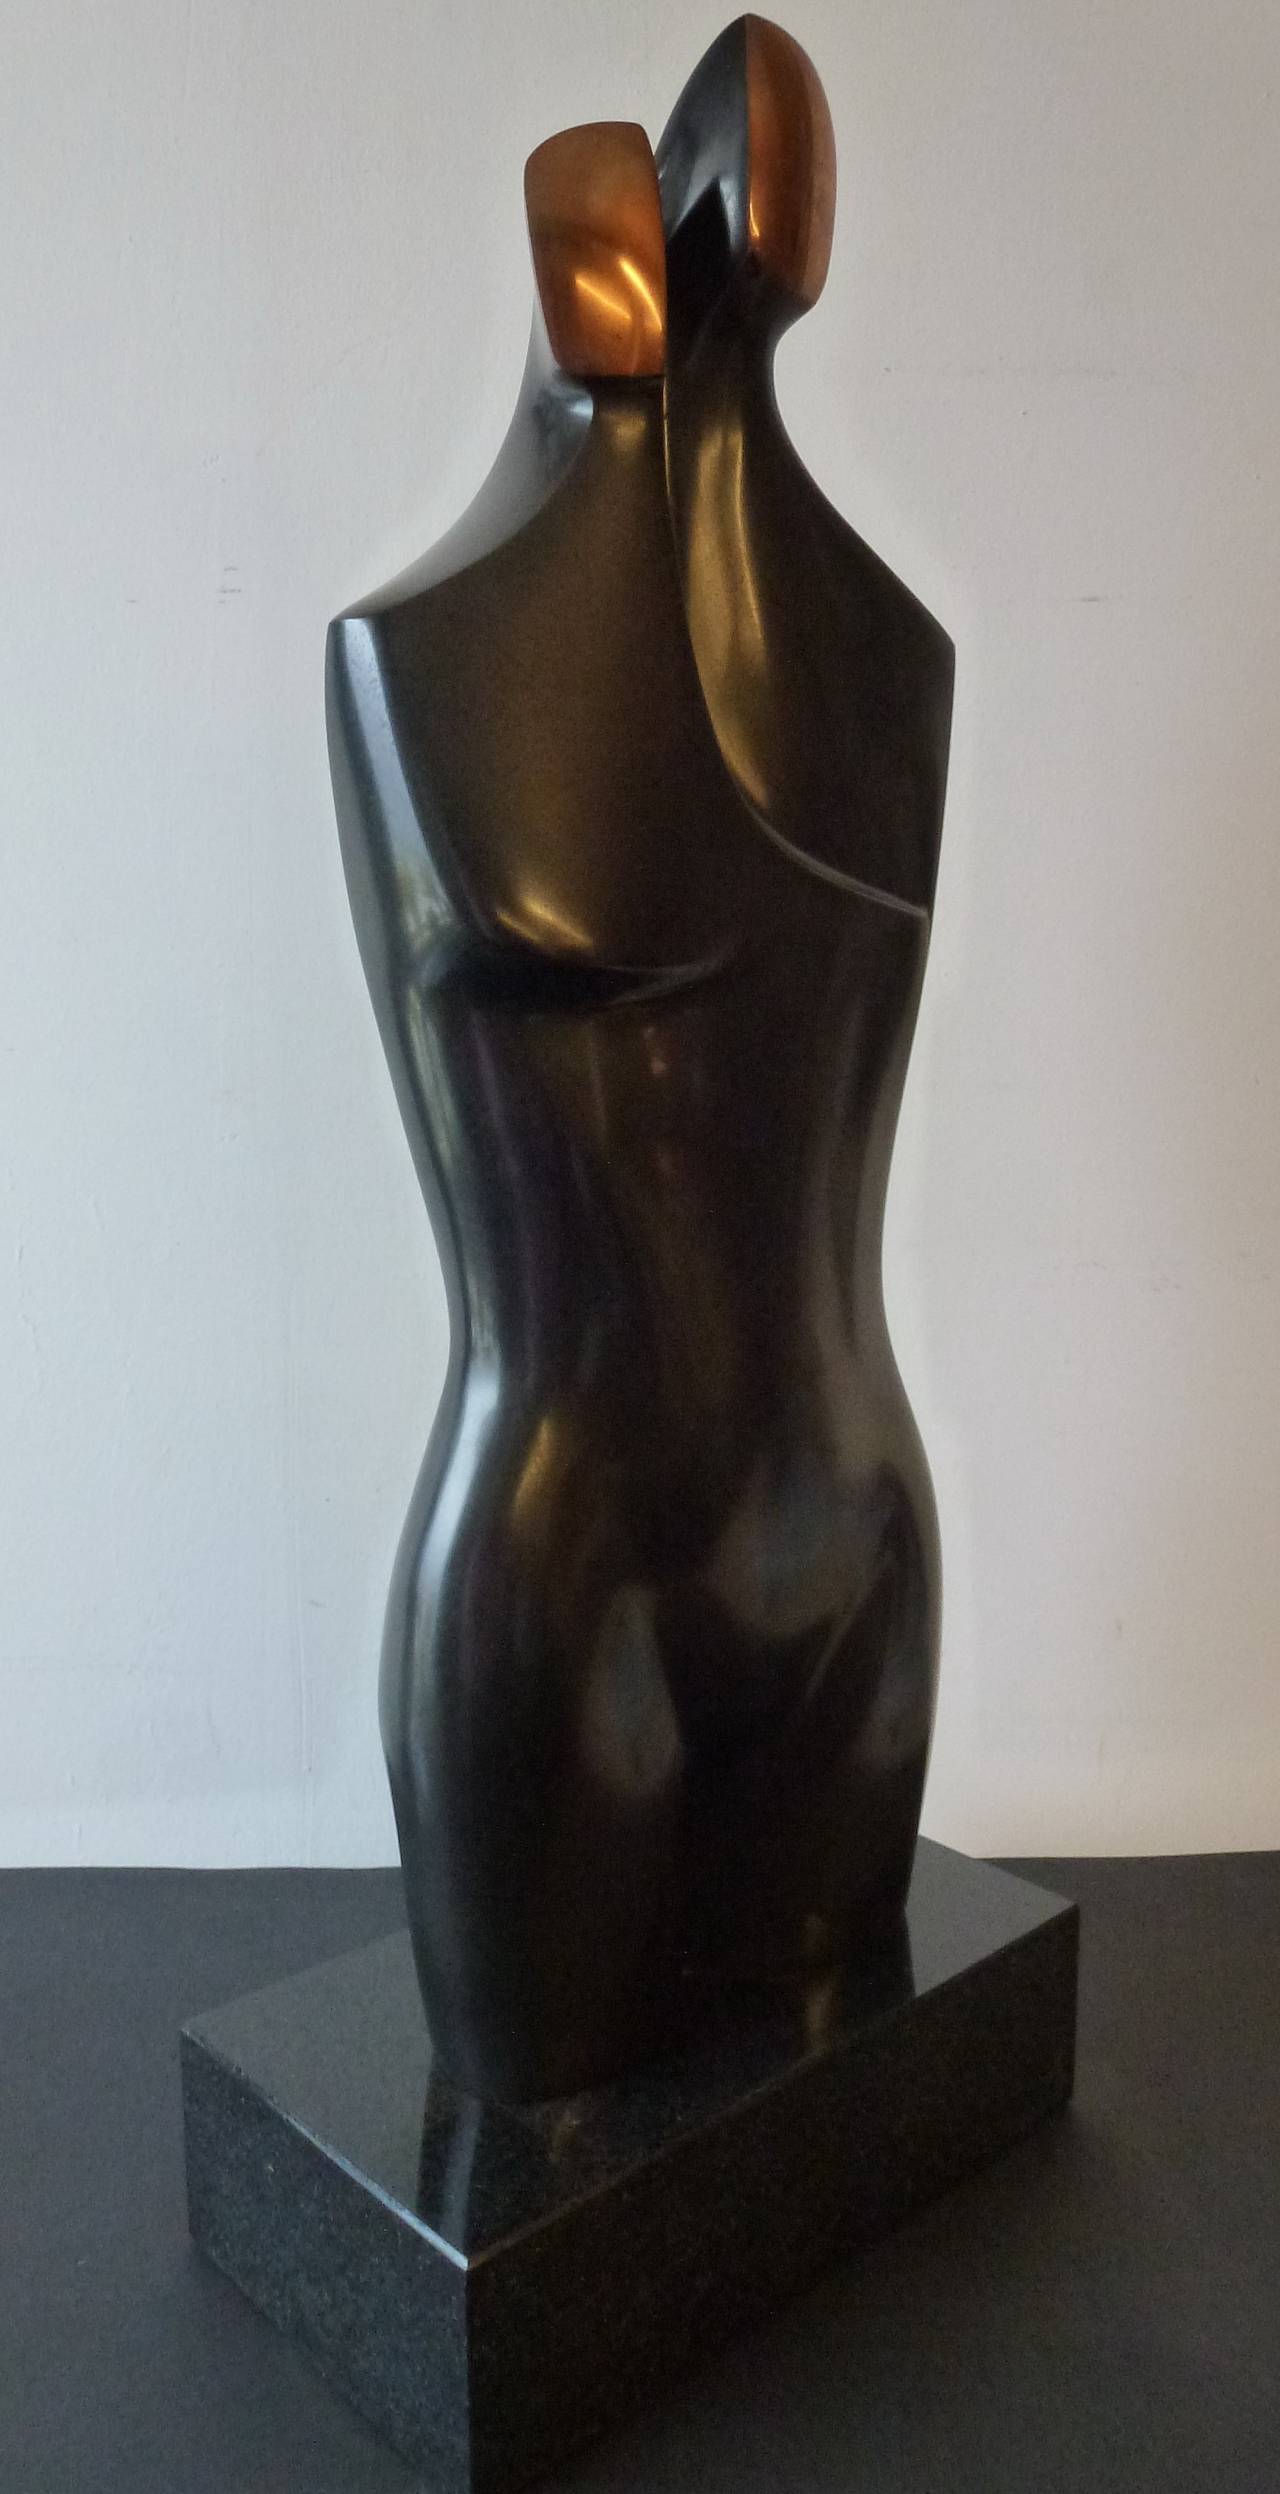 with polished faces, on hardstone base.
Signed and numbered: Pecego 4/8

Gloria Pecego (Rio de Janeiro, 1954) lives and works in Rio de Janeiro and in various European cities such as Paris and Amsterdam. She followed various art studies in Europe